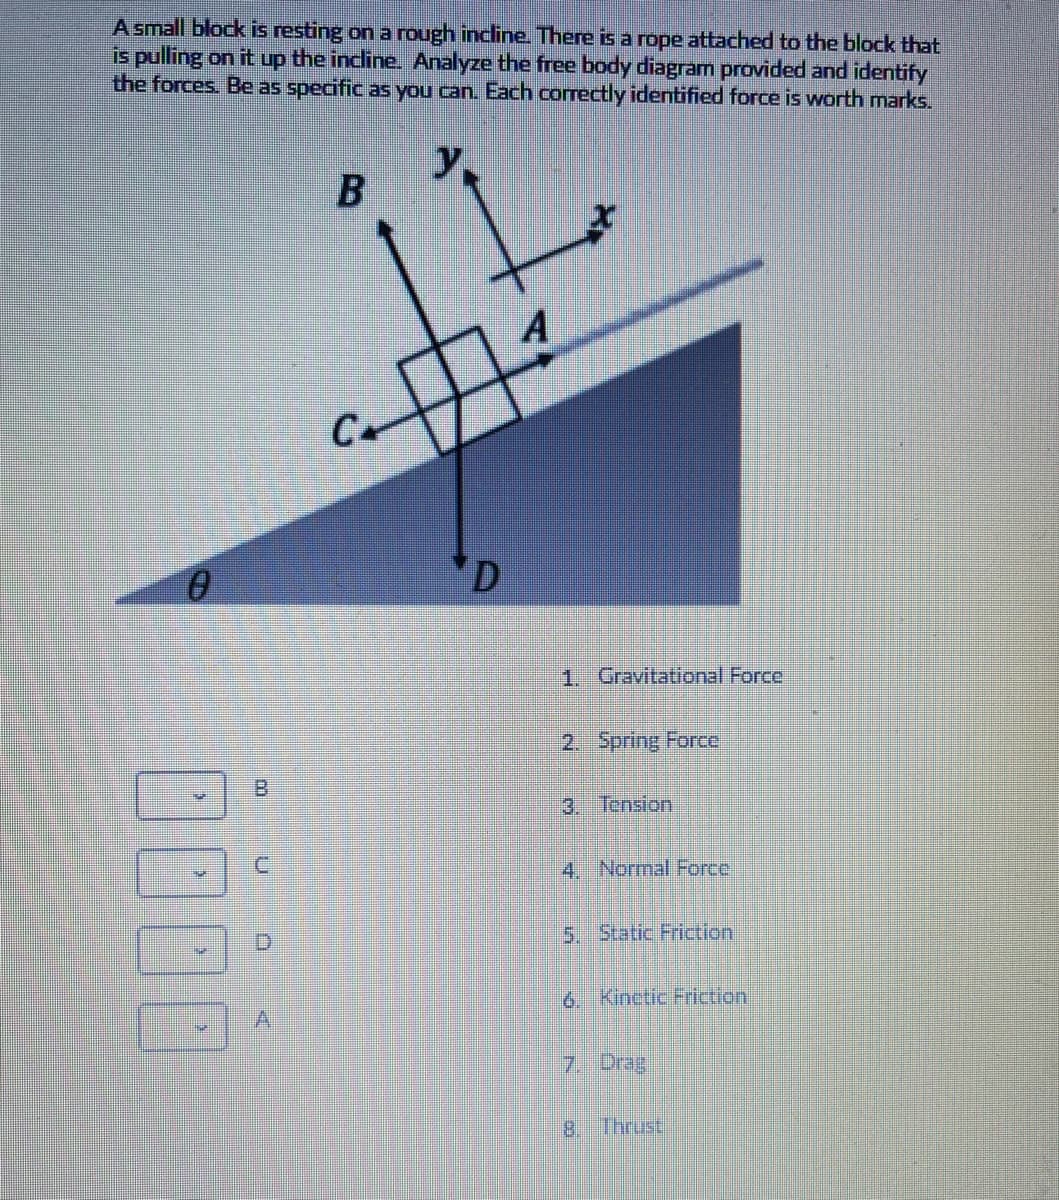 A small block is resting on a rough incline. There is a rope attached to the block that
is pulling on it up the incline. Analyze the free body diagram provided and identify
the forces. Be as specific as you can. Each correctly identified force is worth marks.
12
y,
C.
'D
1. Gravitational Force
2. Spring Force
B.
3. Теnsion
4. Normal Force
5. Static Friction
6. Kinctic Friction
7. Drag
8. Thrust
B.
